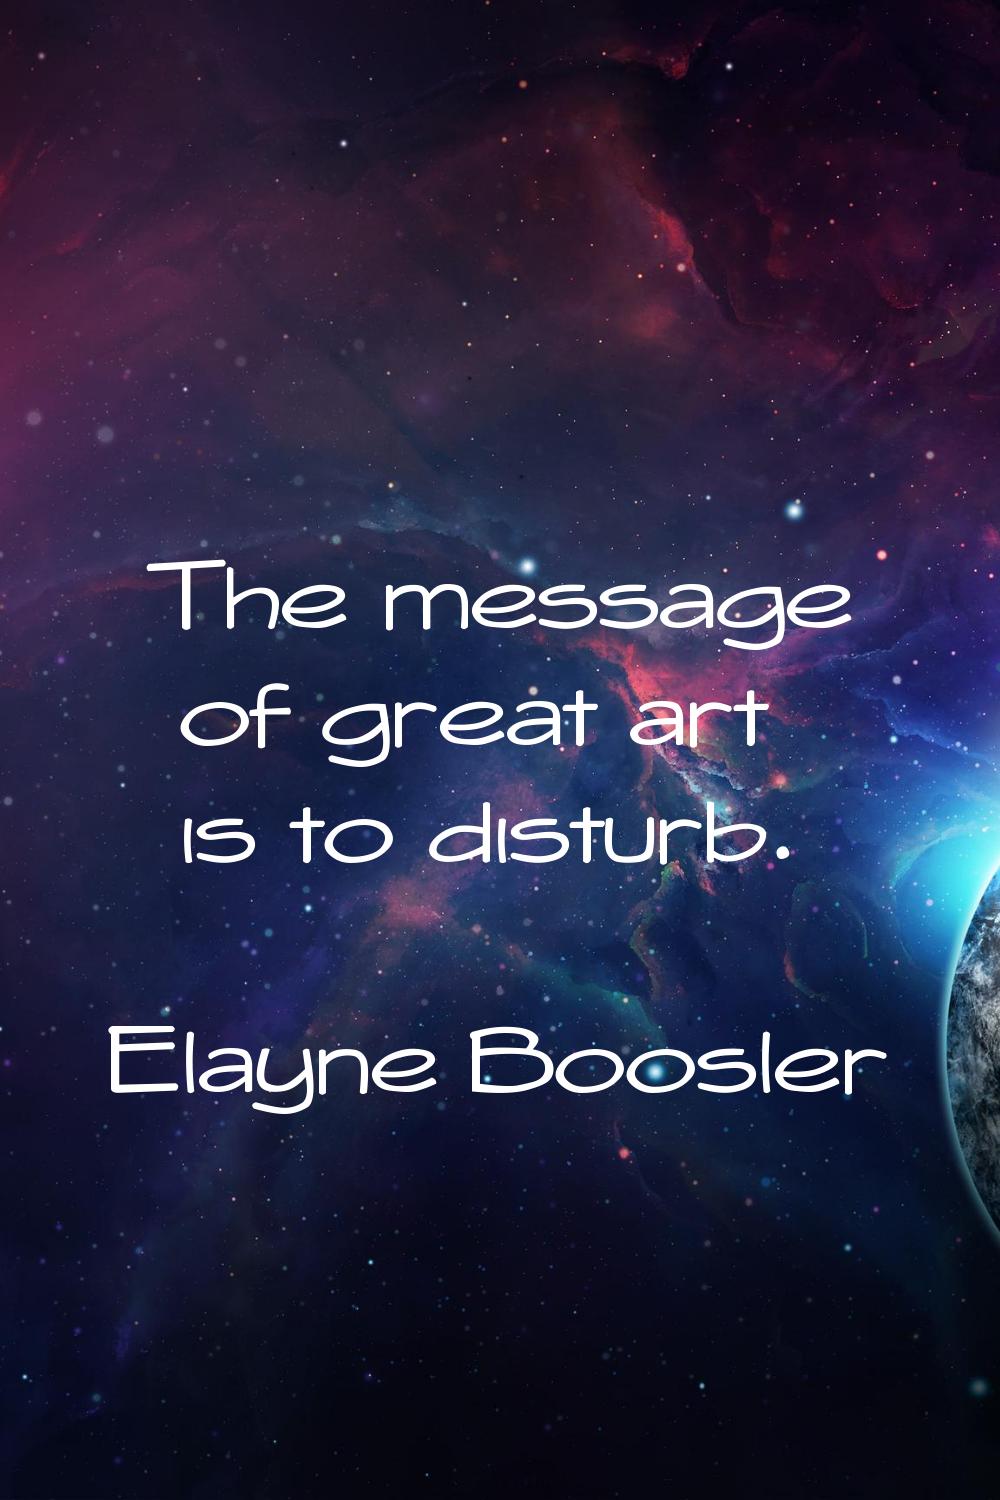 The message of great art is to disturb.